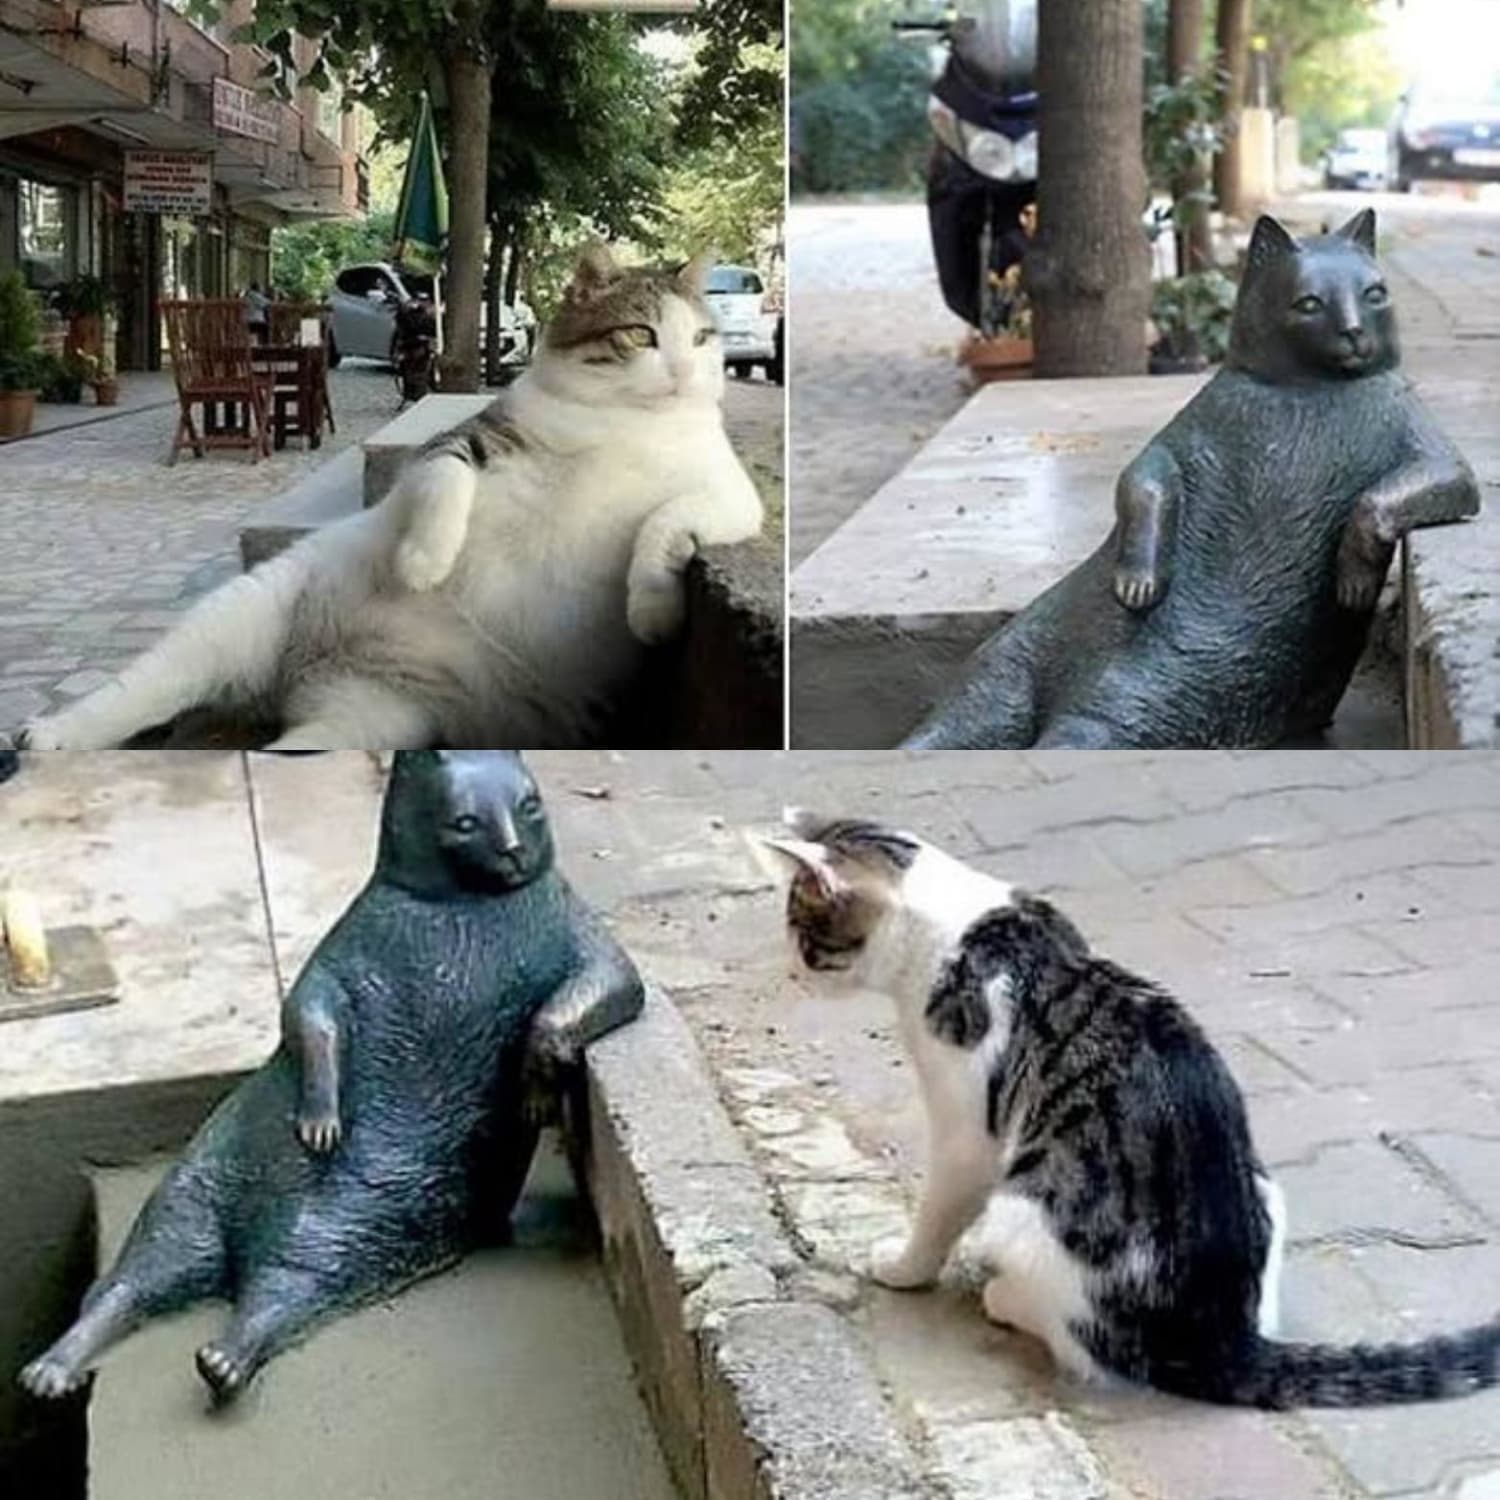 On Request. The statue of "Tombili". She was a street cat who lived in Istanbul. She was known for her friendliness and her way of leaning against steps.